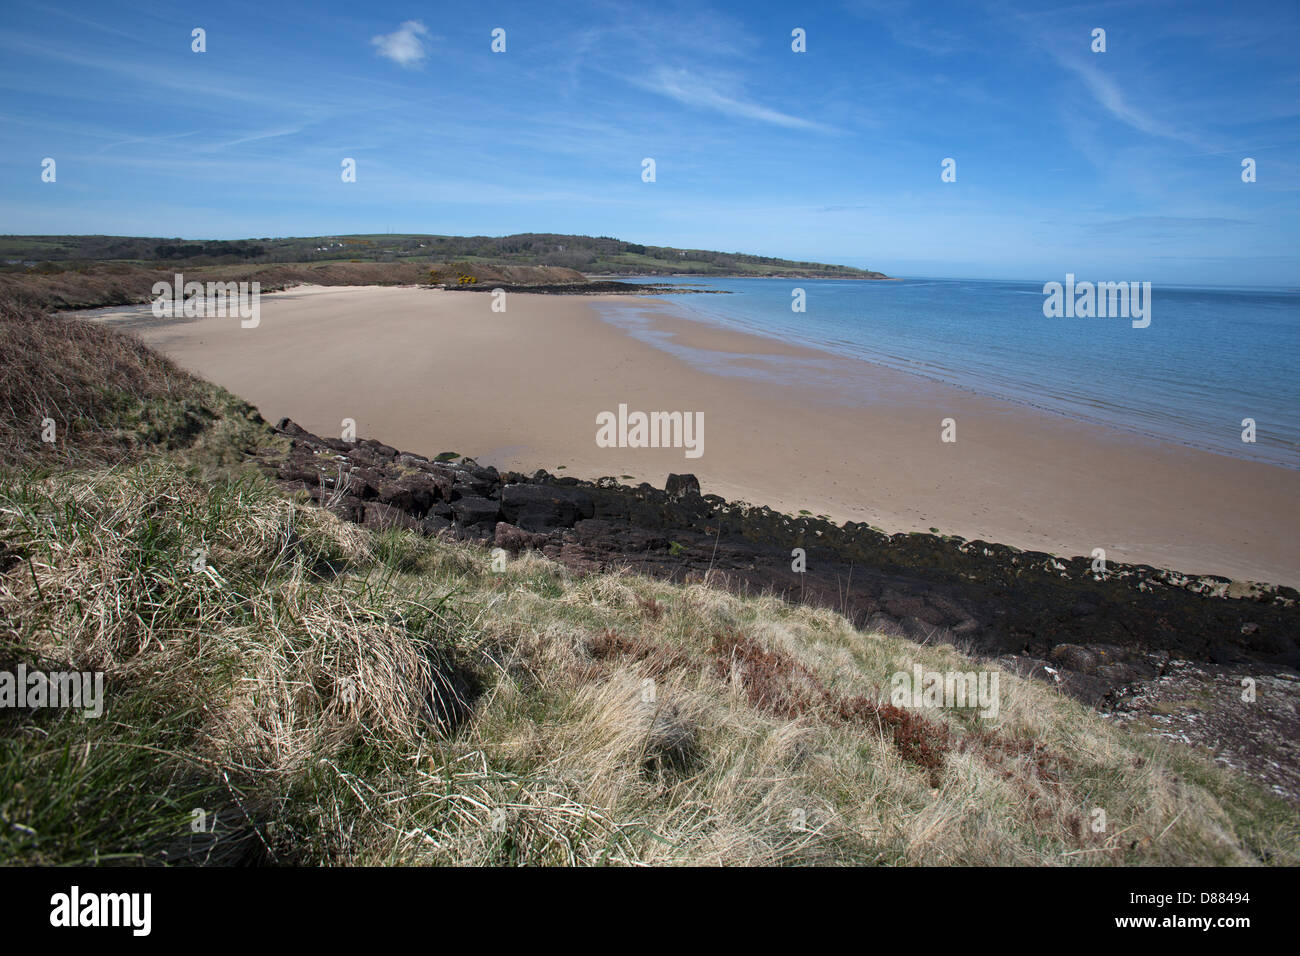 The Wales Coastal Path in North Wales. Picturesque view of Traeth tr Ora with Dulas Bay in the background. Stock Photo